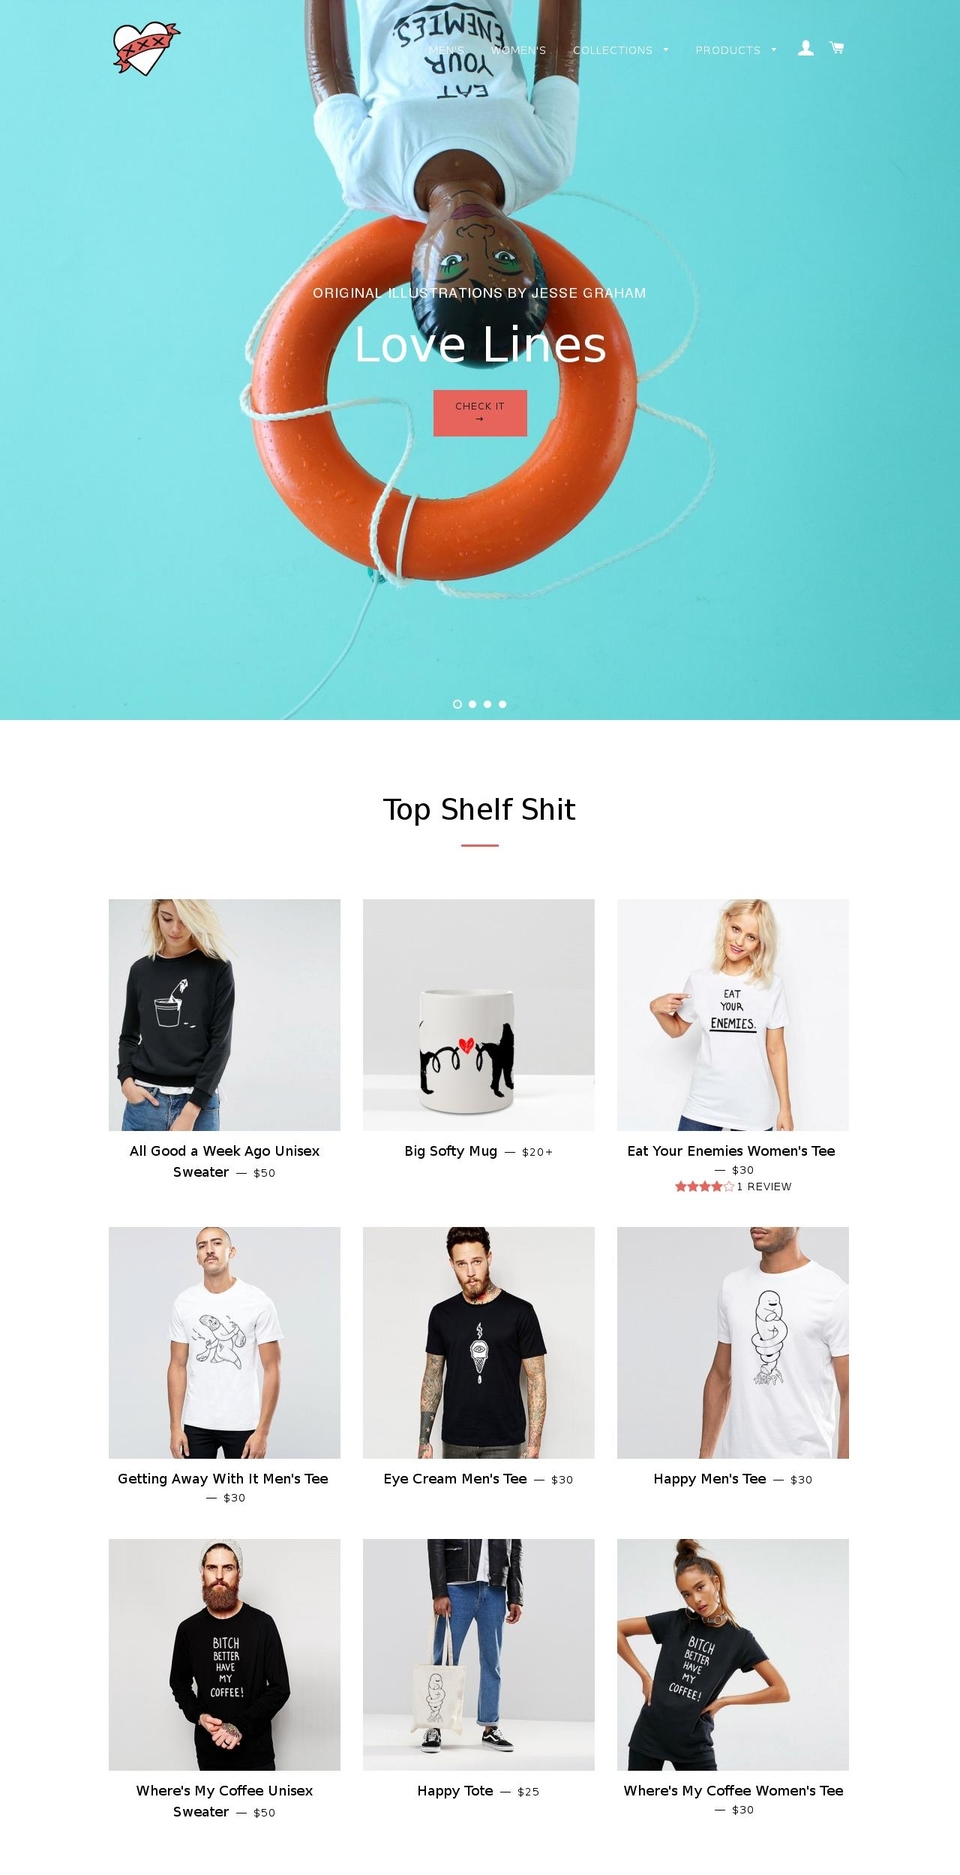 boundless Shopify theme site example getlovelines.com